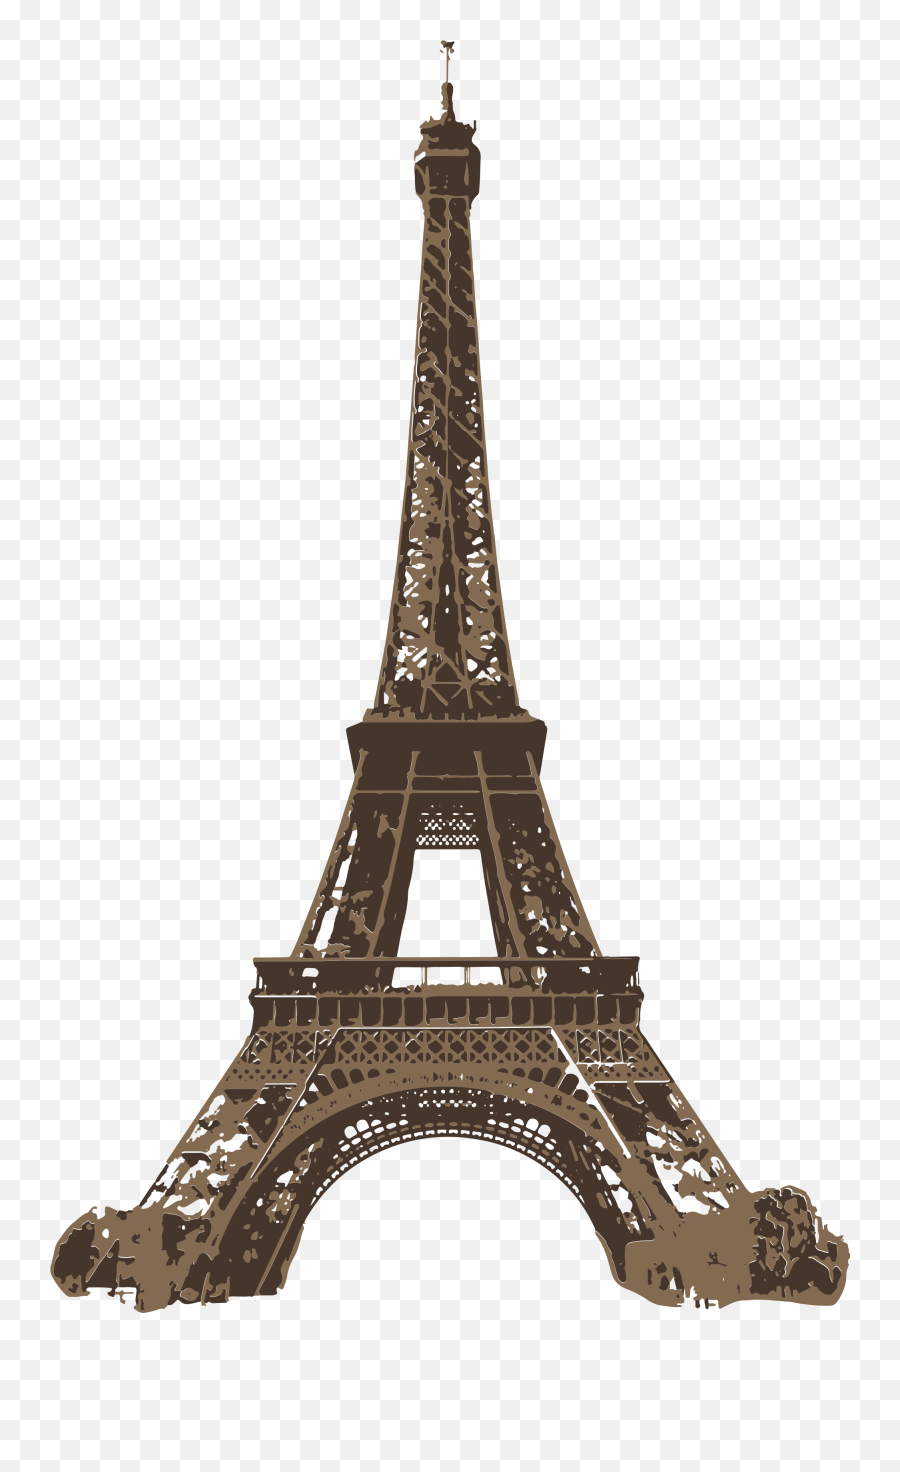 Eiffel Tower Png File 1 Image - Eiffel Tower,What Is A .png File